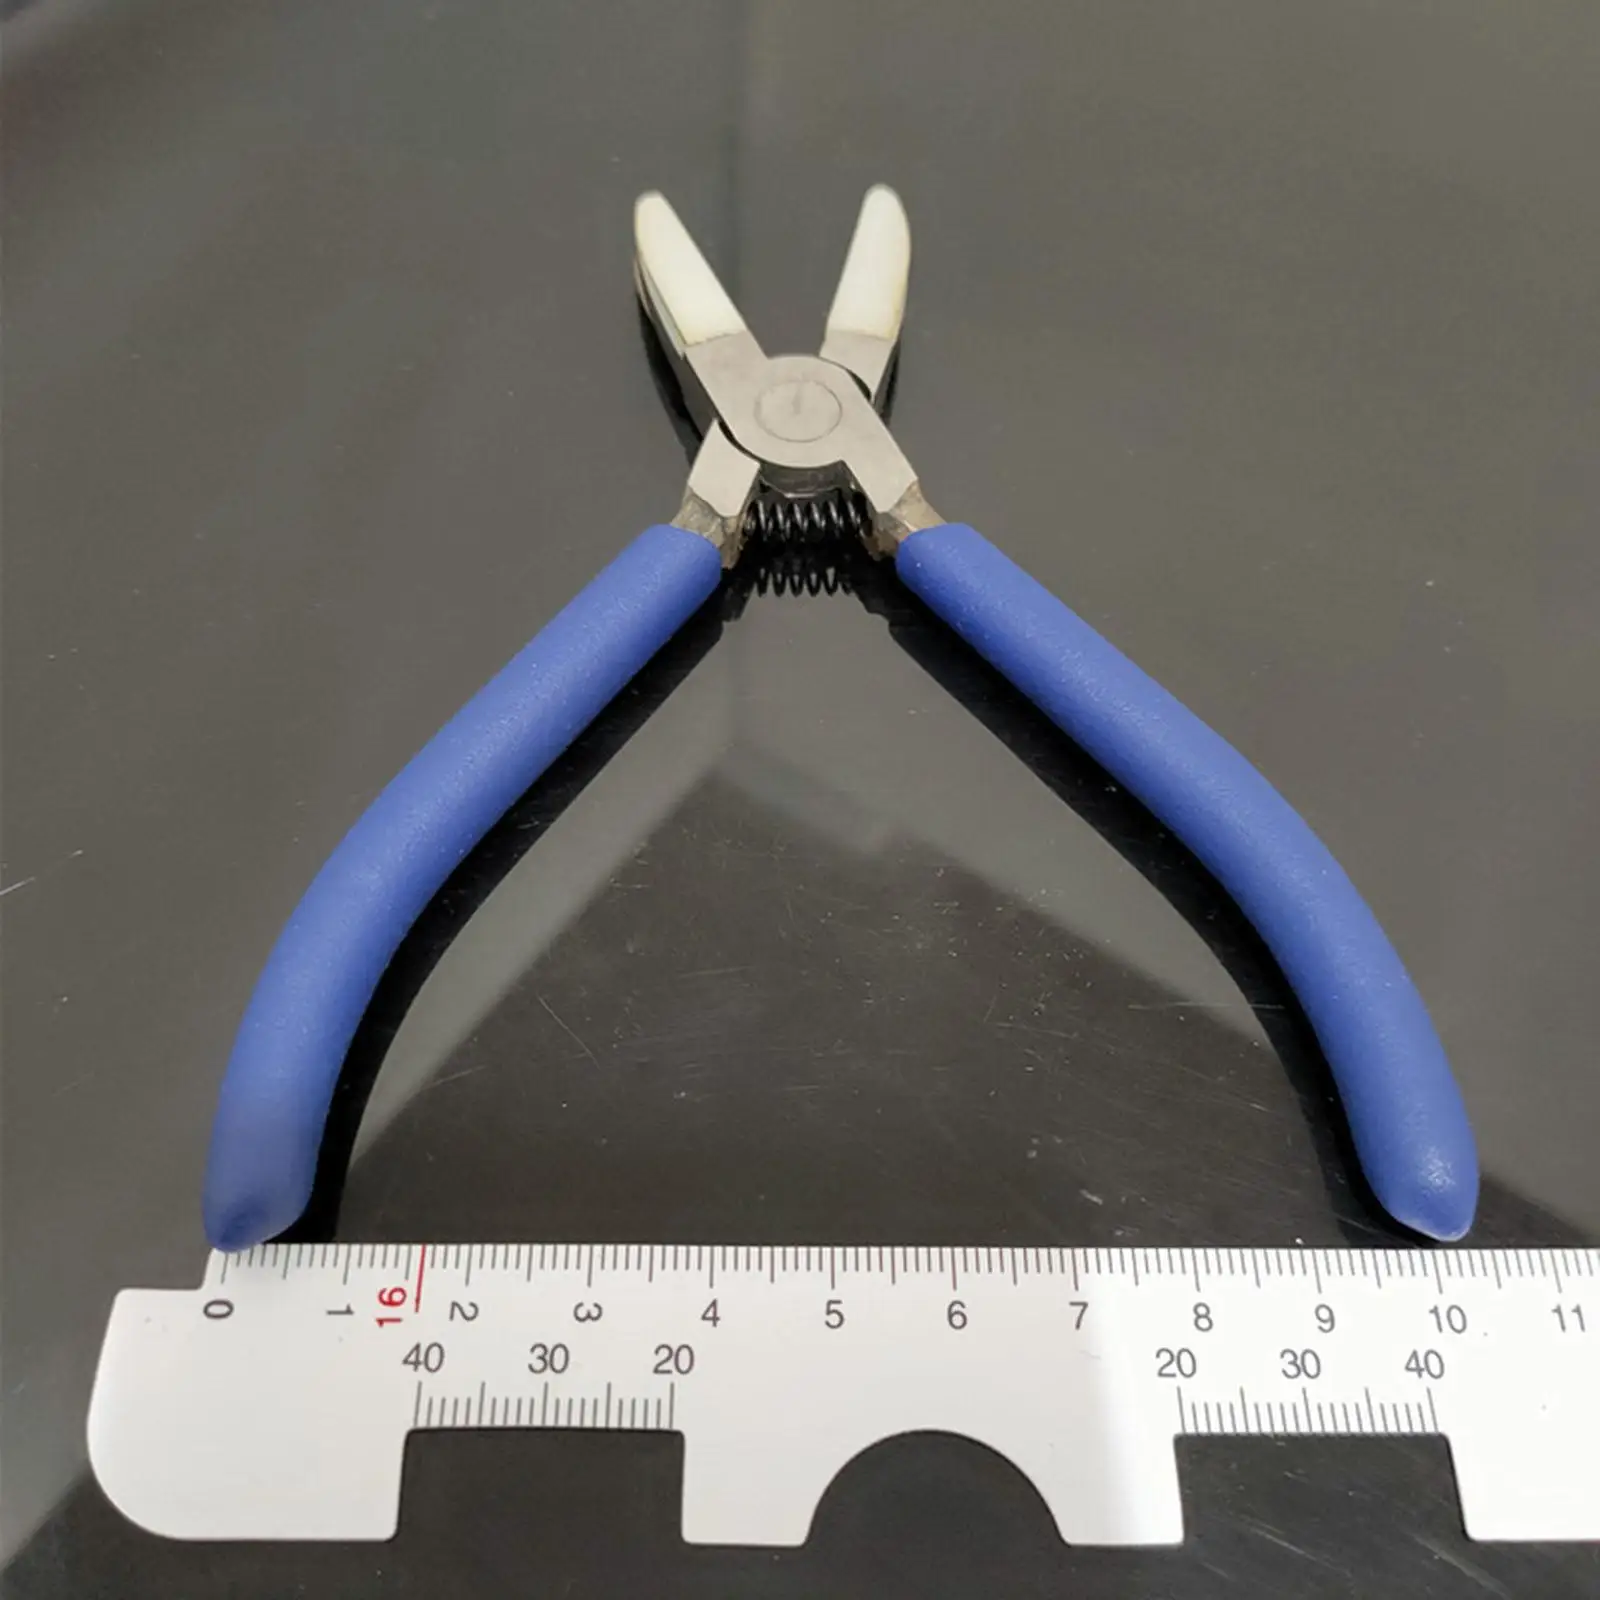 5.3 inch Double Nylon Jaw Pliers Carbon Steel Jewelry Pliers for Beading Twisting Shaping Wire Wire Straightener Sturdy Durable